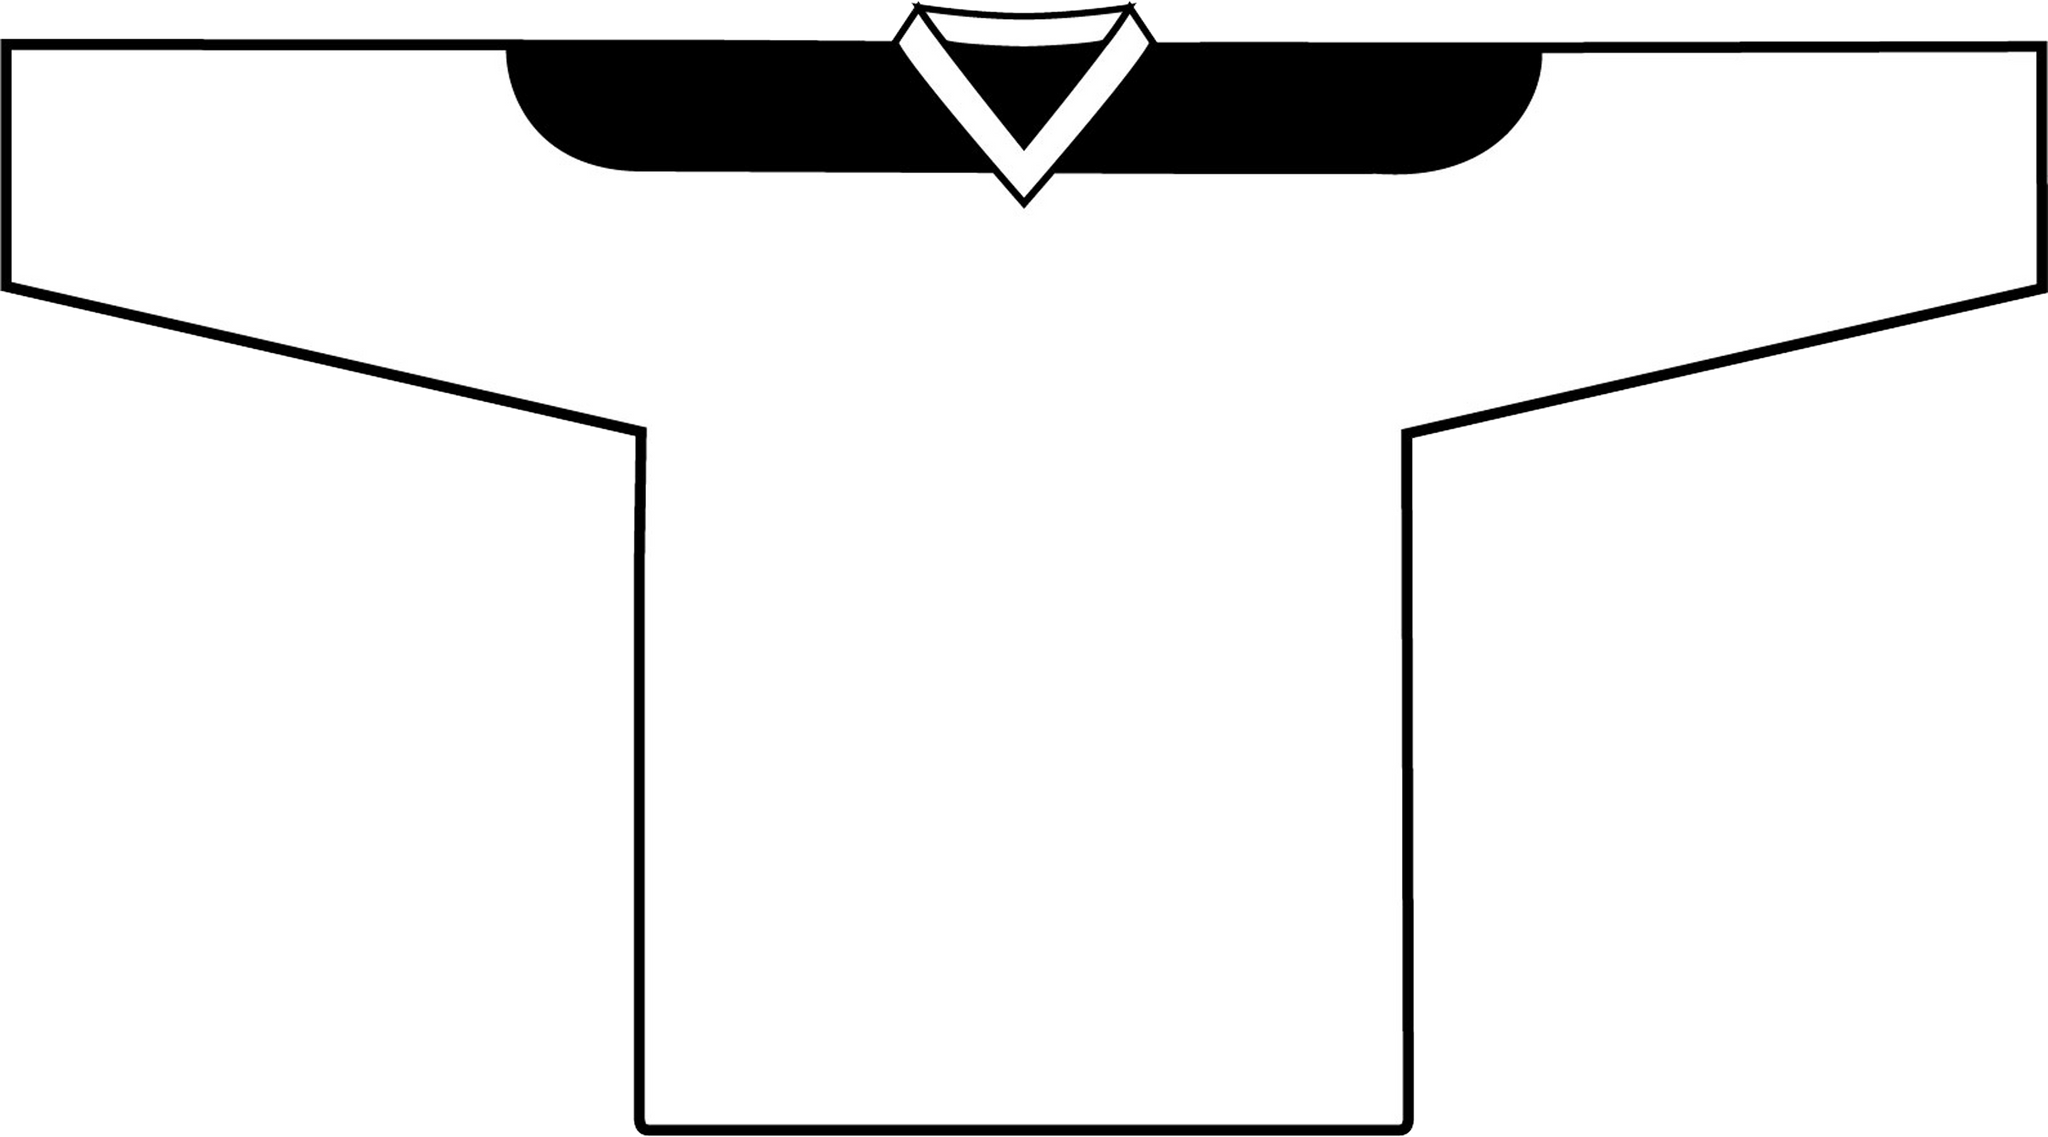 Full Team - League Jerseys - Mid-Weight Pro Knit (15 Players)